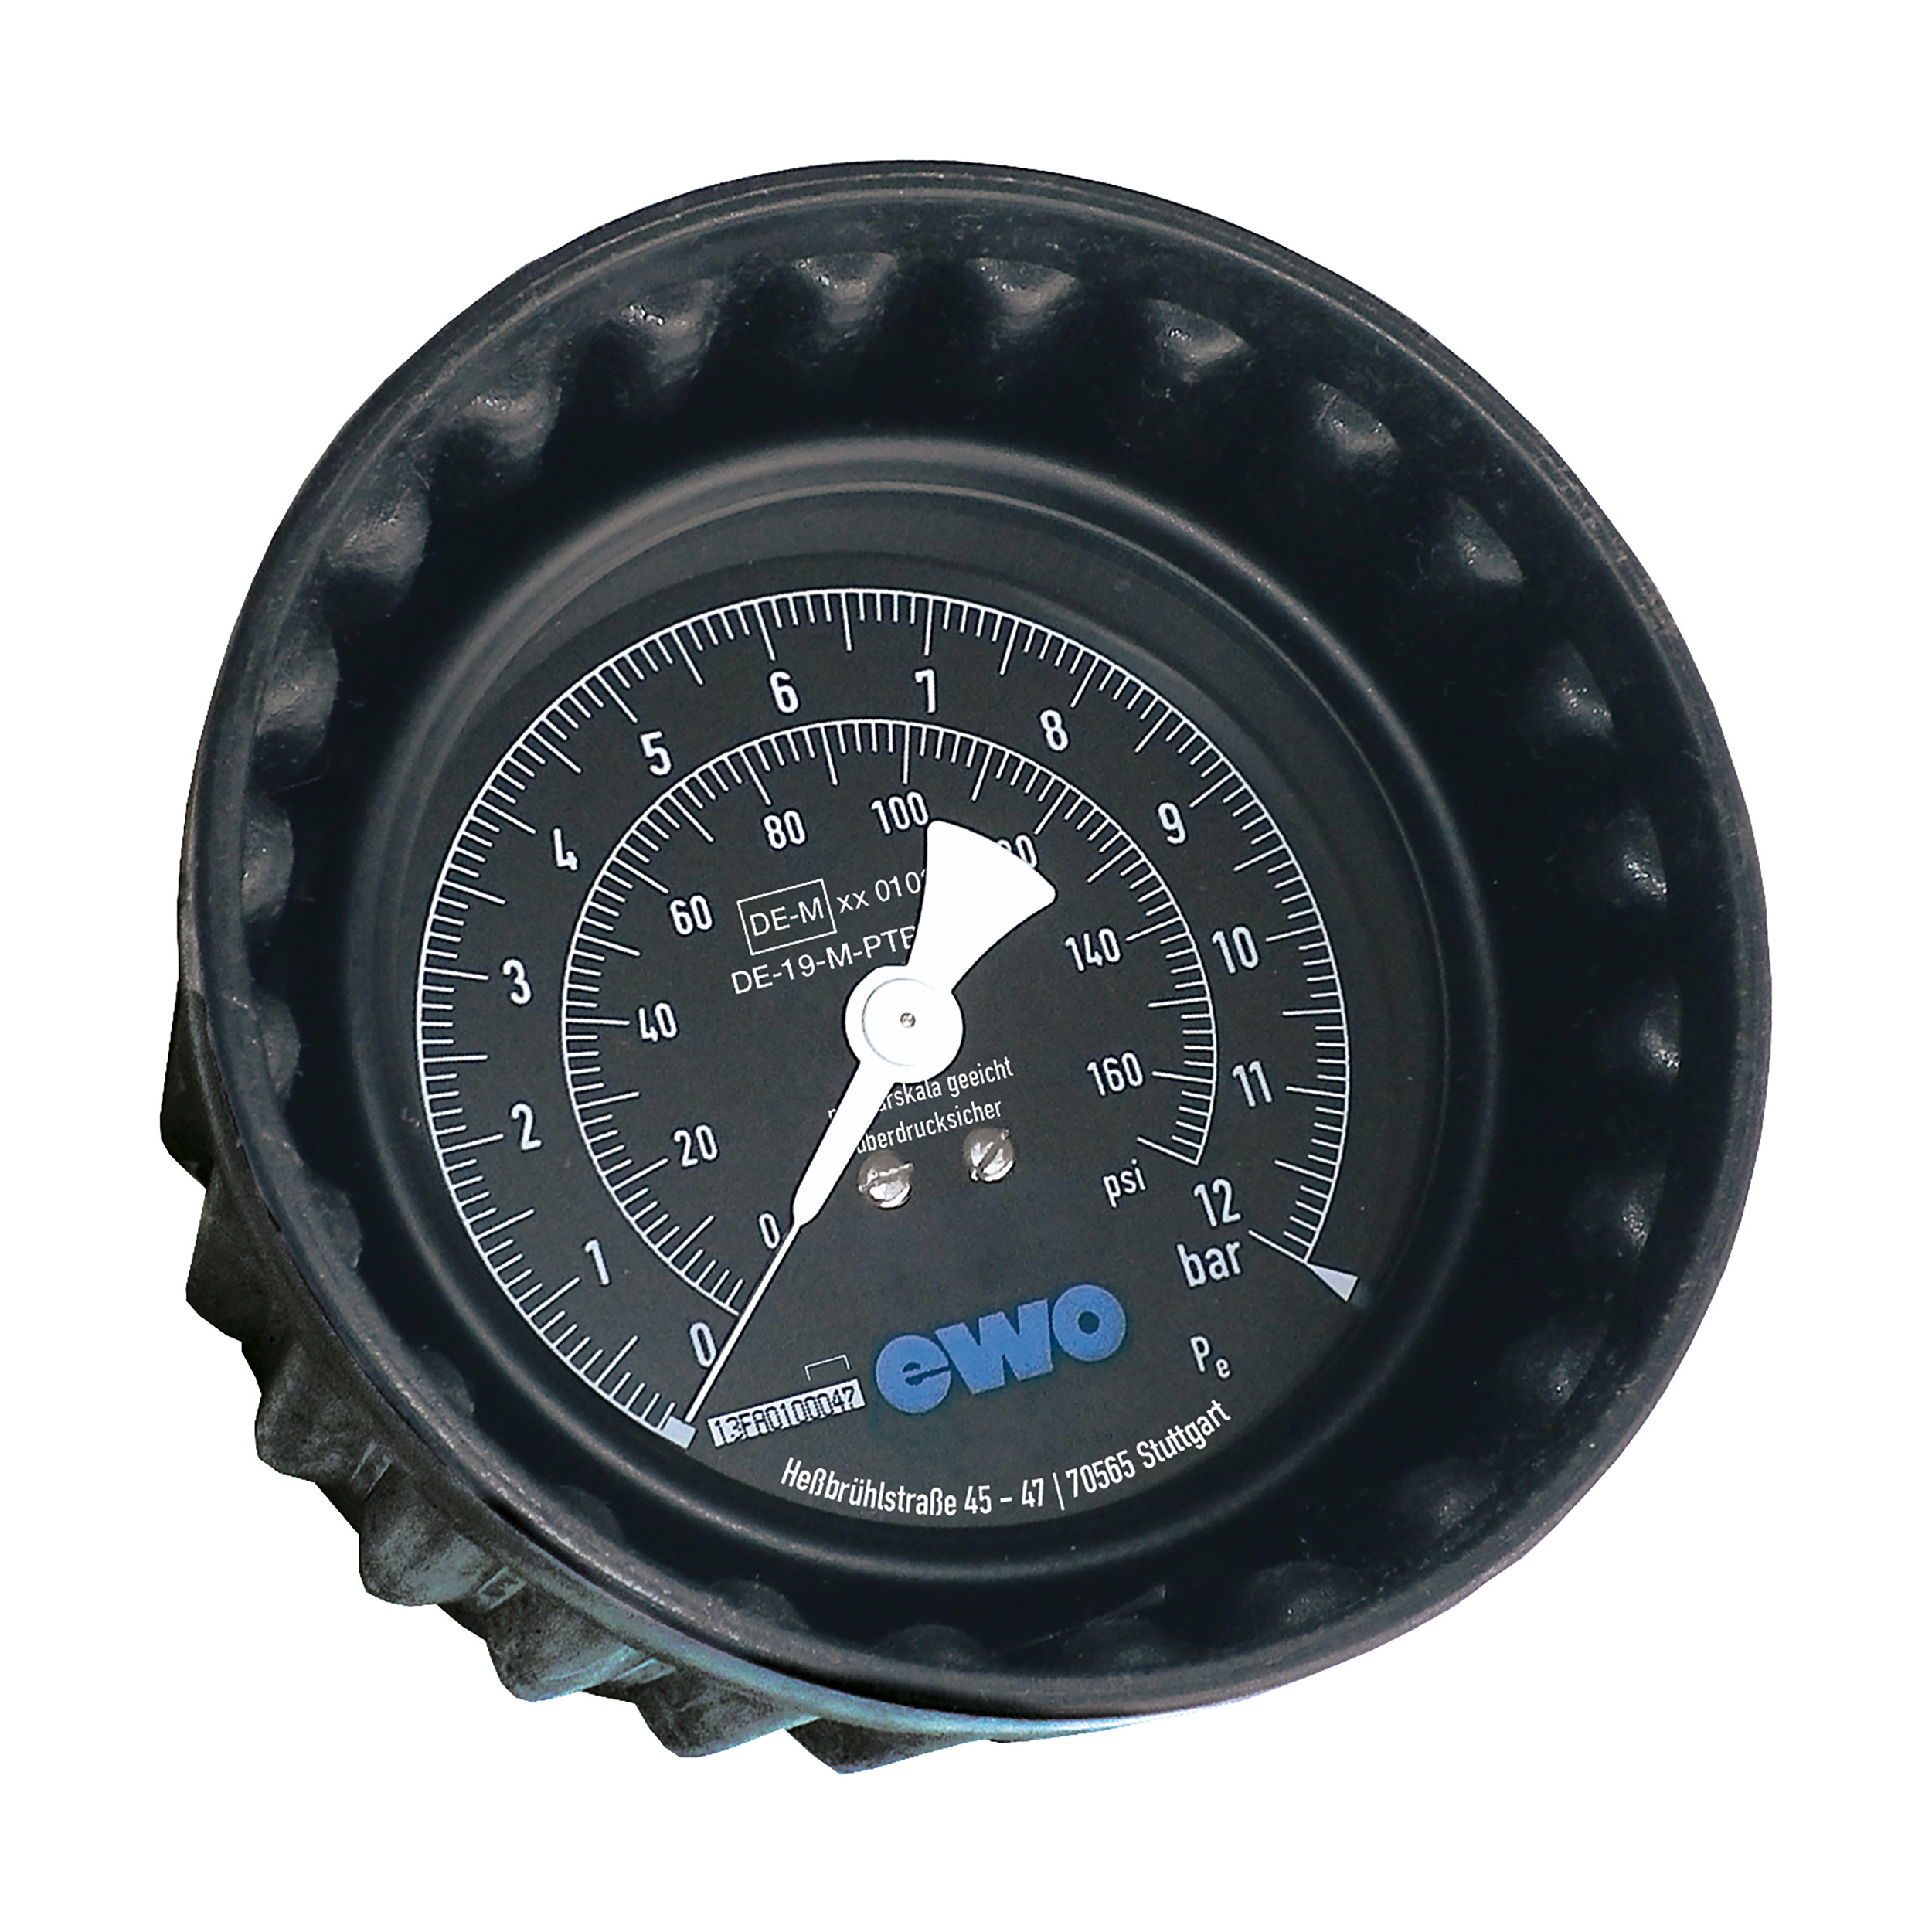 Gauge with protection cap, Ø80 mm, 0–170 psi/0–12 bar, double scale, subdivision 0.2 psi, safe against overpressure up to 221 psi